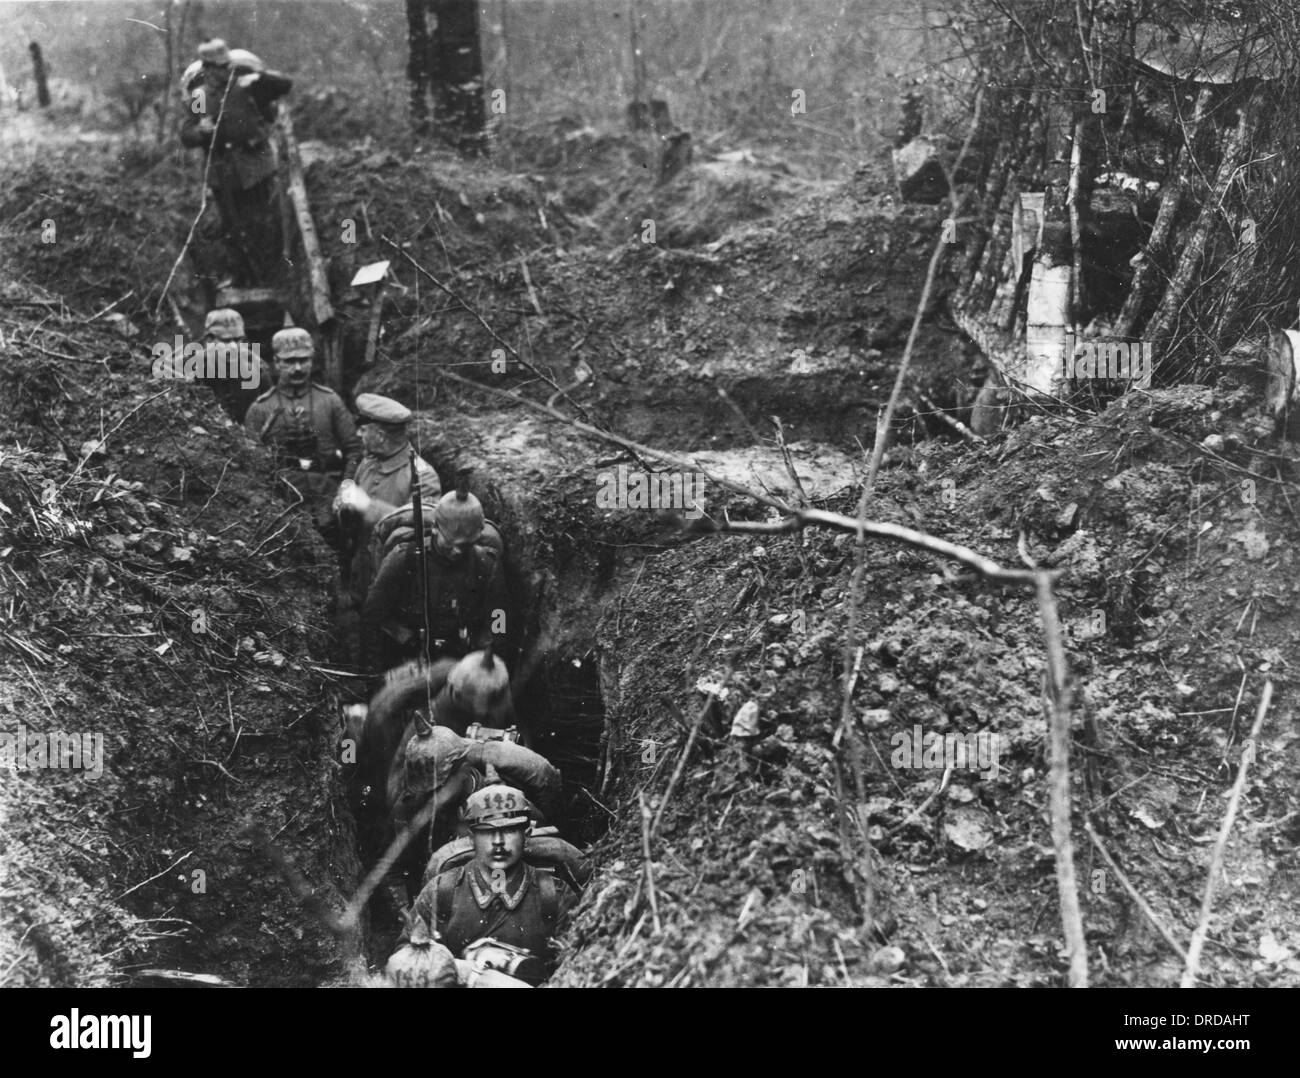 German Army Dispatch Dog Under Fire Trenches World War 1 7x3 Inch Reprint Photo